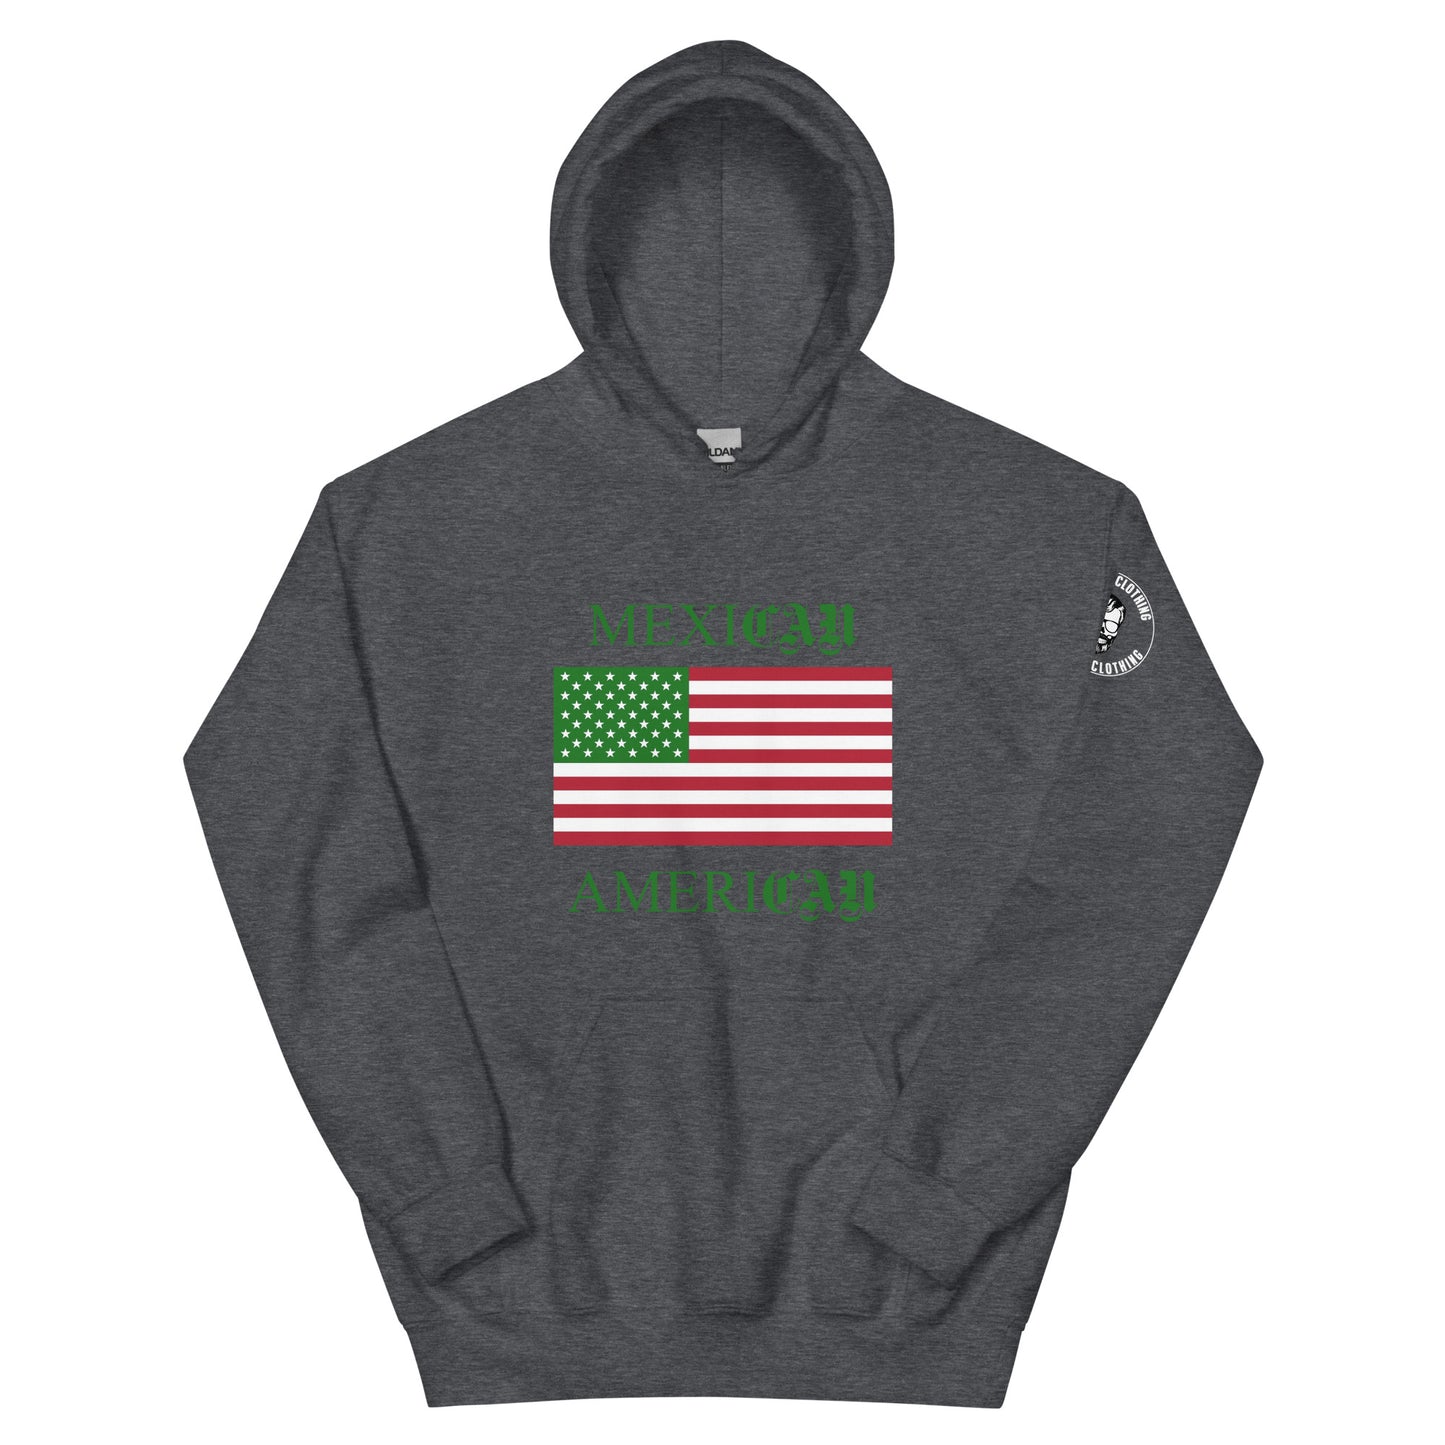 Don Sy Mexican/American Unisex Hoodie